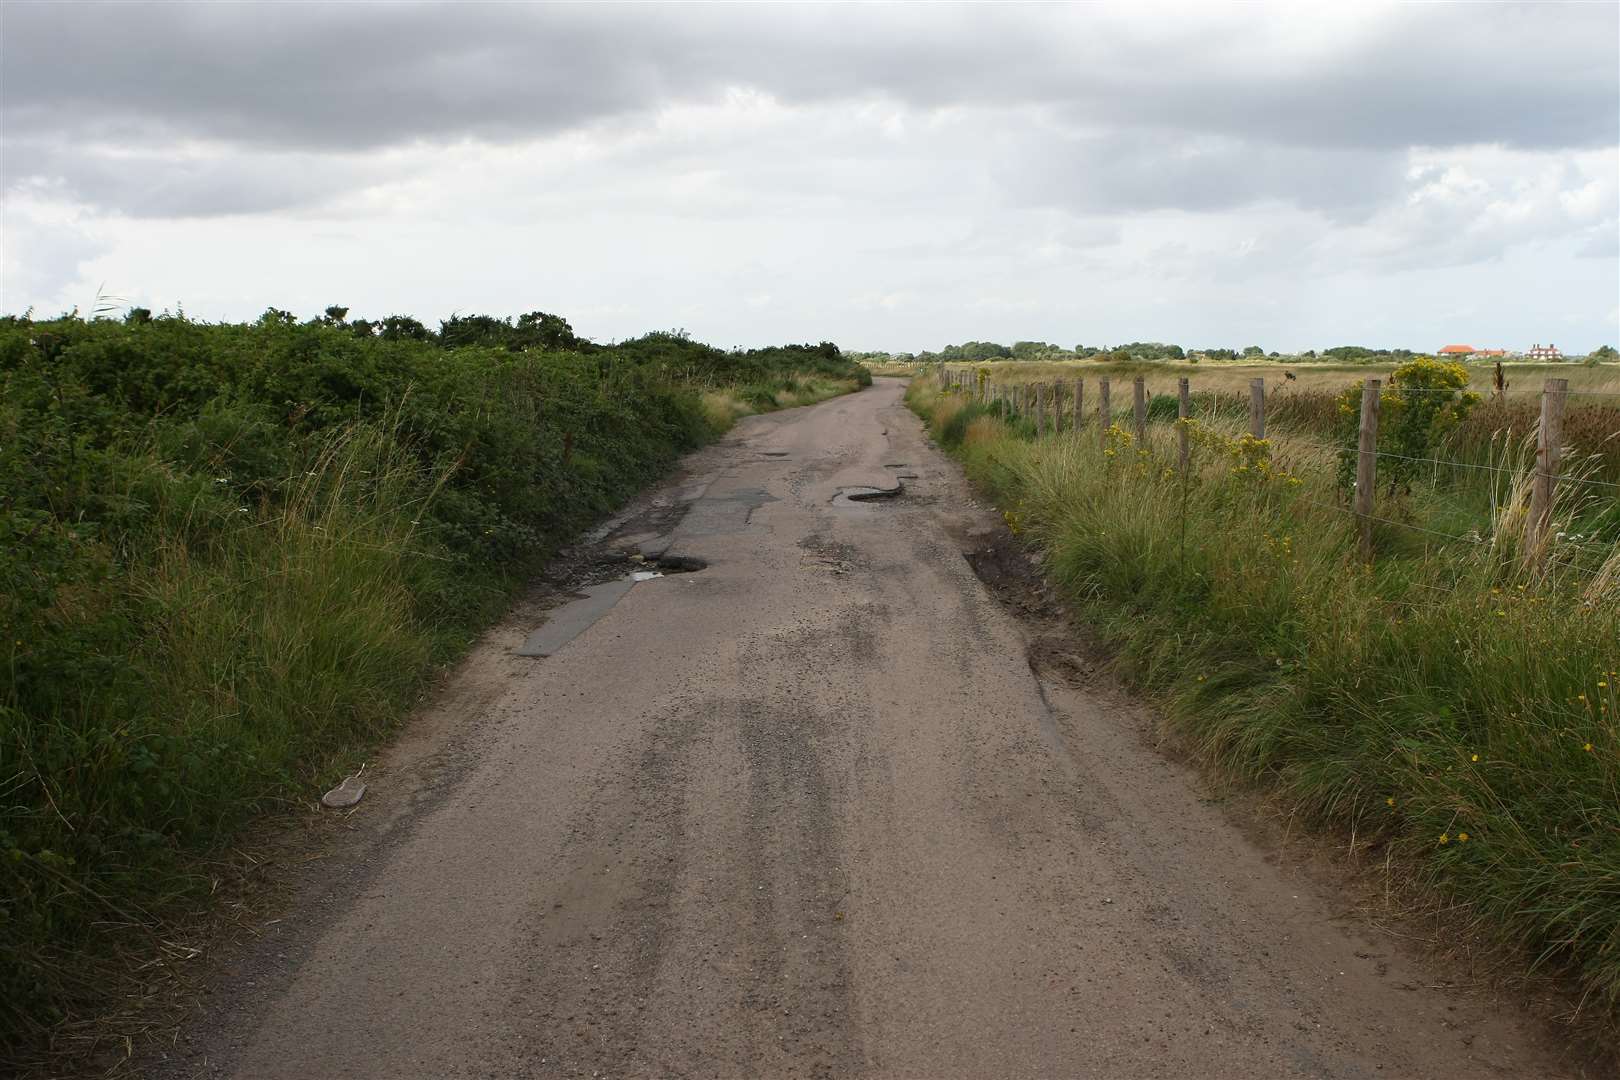 The ancient highway, near to where the incident happened